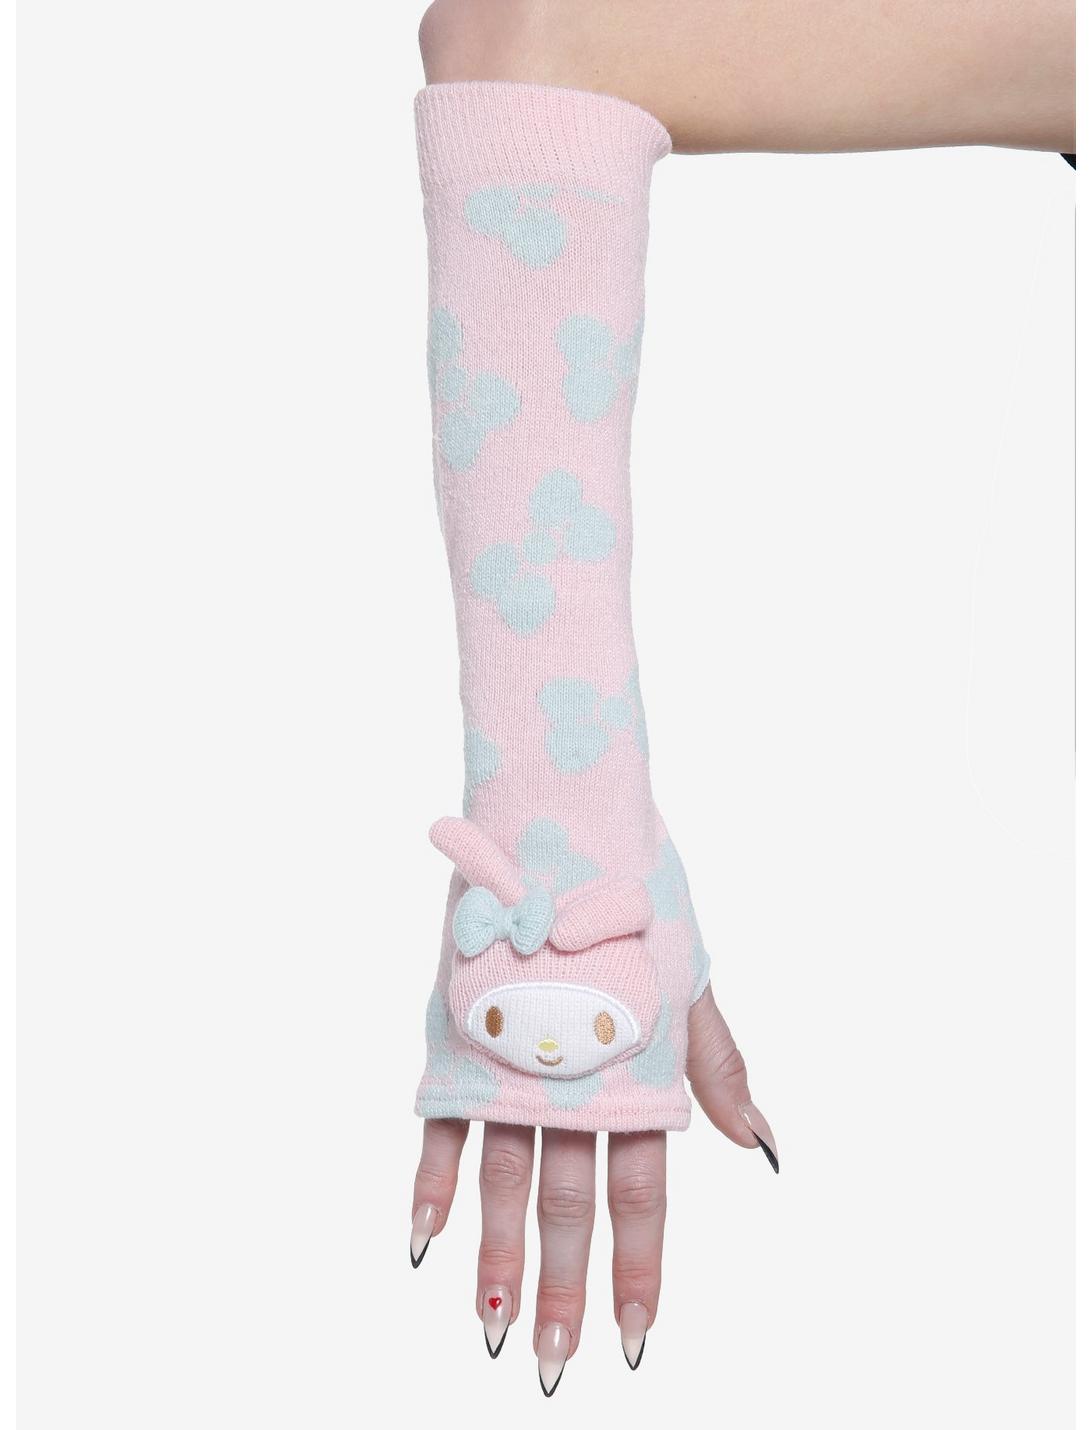 My Melody Bow Plush Arm Warmers, , hi-res